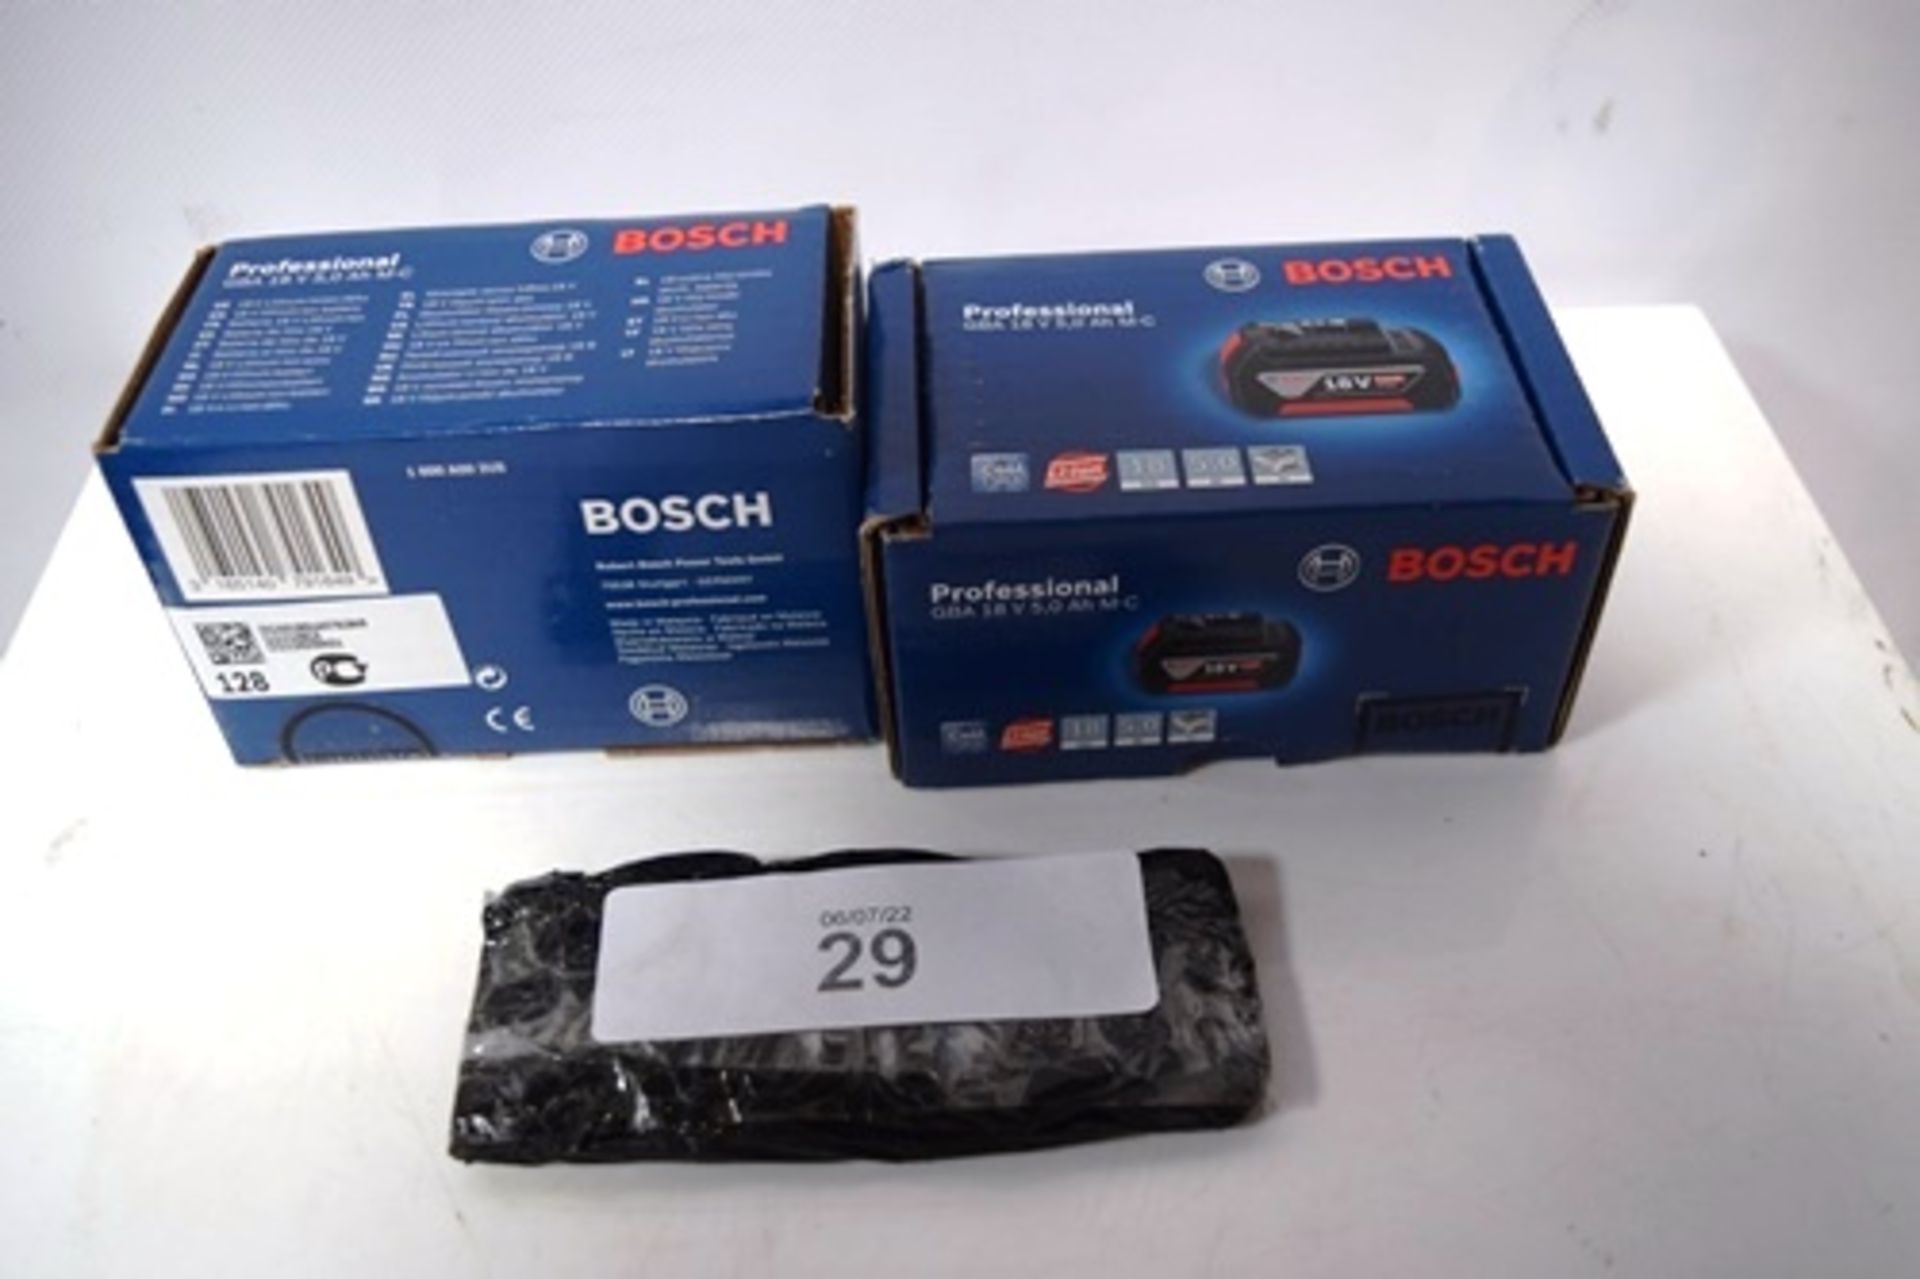 5 x Bosch Professional GBA 18V 5,OAH M-C batteries - Sealed new in box (SW9)